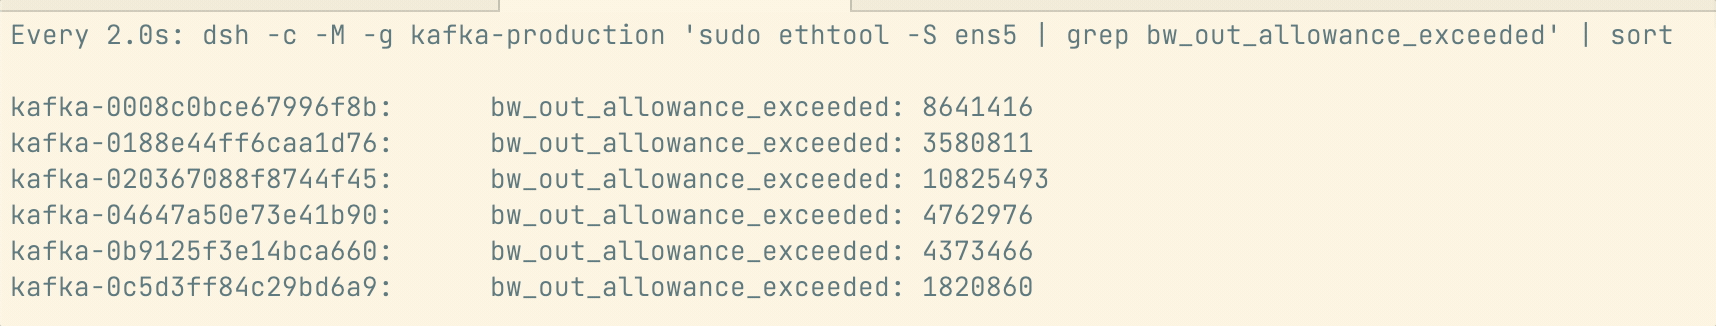 The command and output showing the outgoing bandwidth allowance being exceeded, using 'ethtool'